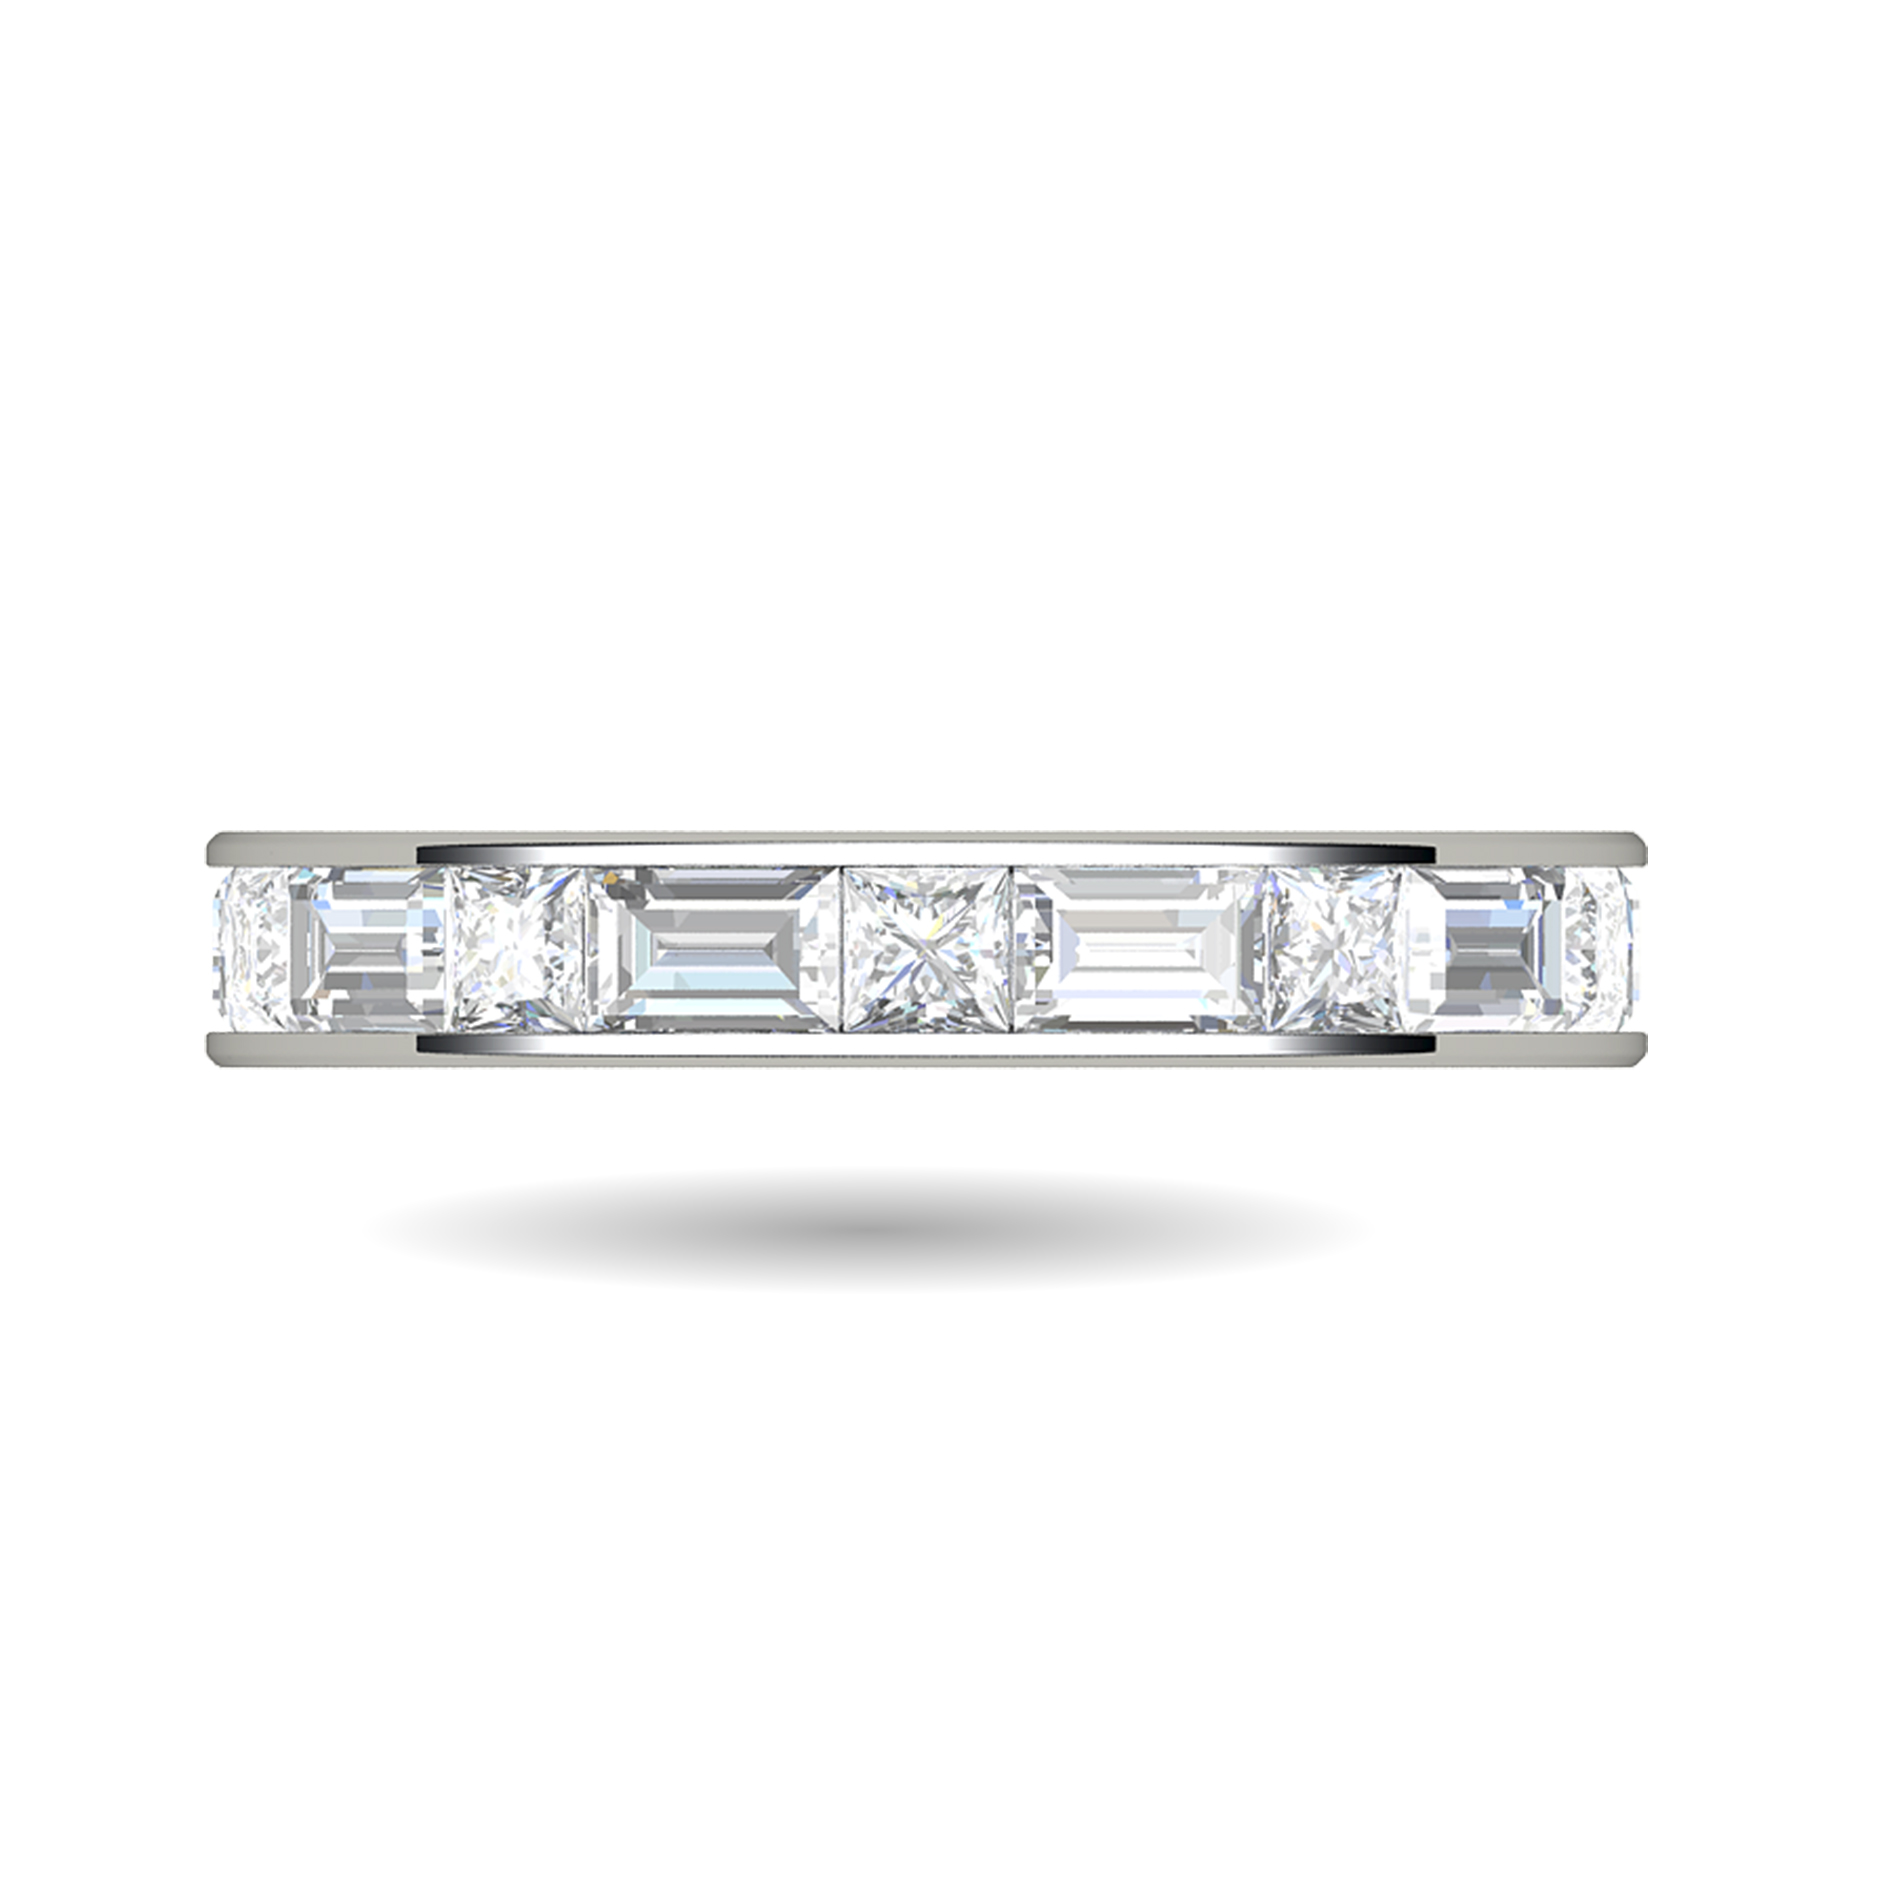 Platinum Channel Set Ring With Baguette and Princess Cut Diamonds